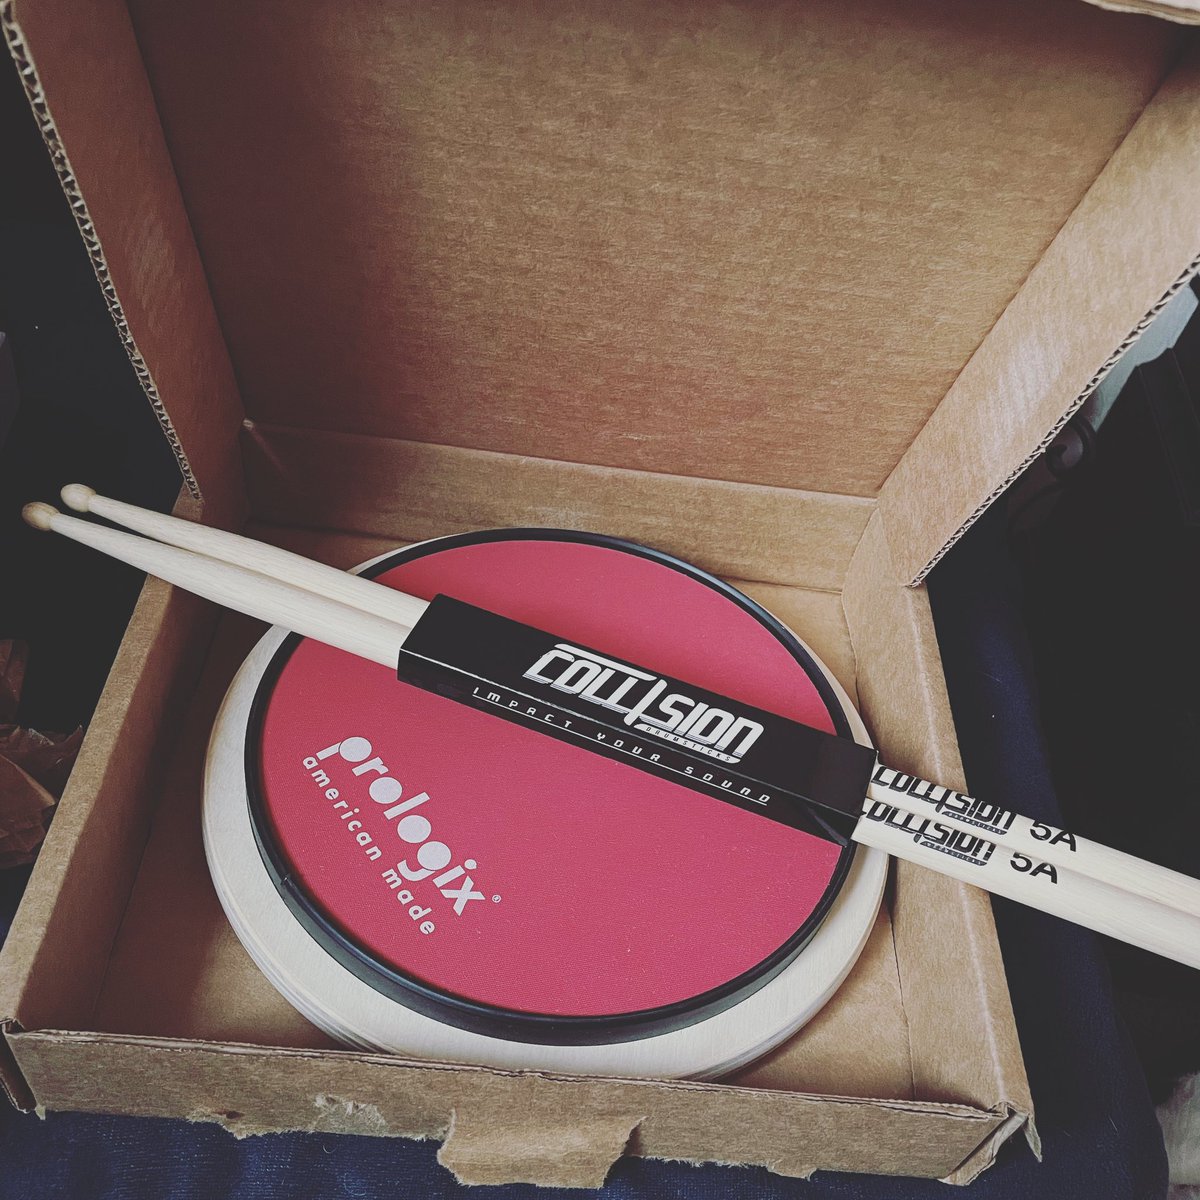 Time to get some practice with the best products @CollisionSticks @prologixpads 🥁❤️ #drummer #musician #Practice #rudiments #drumpractice